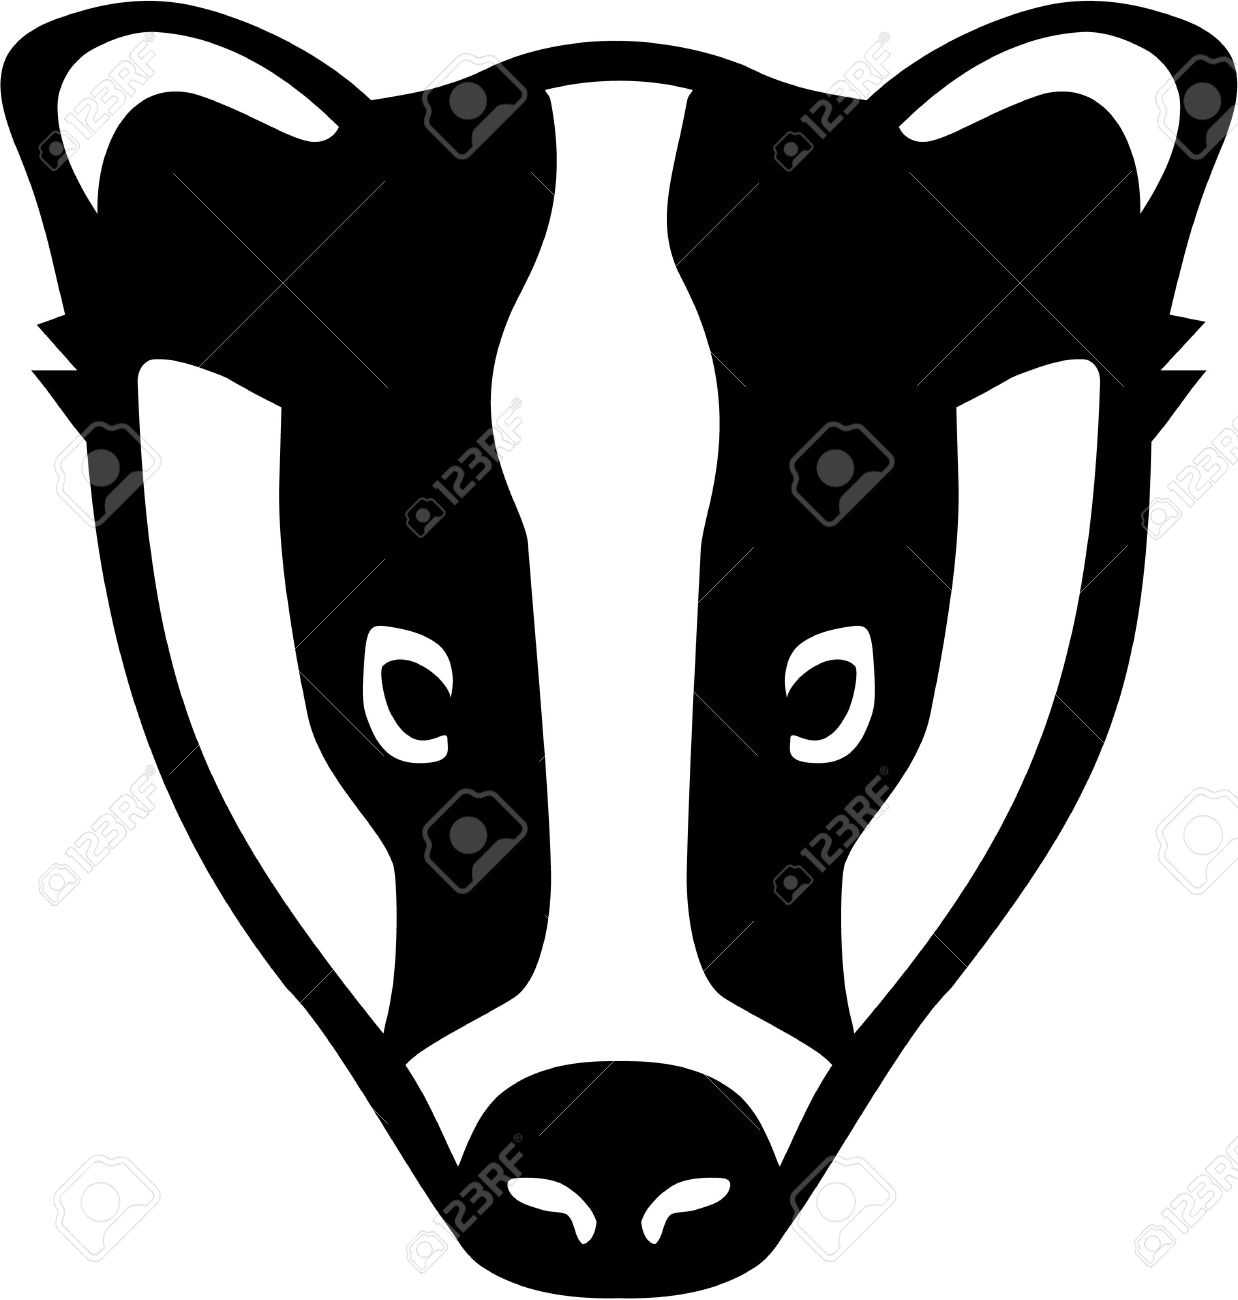 Badger Stock Photography